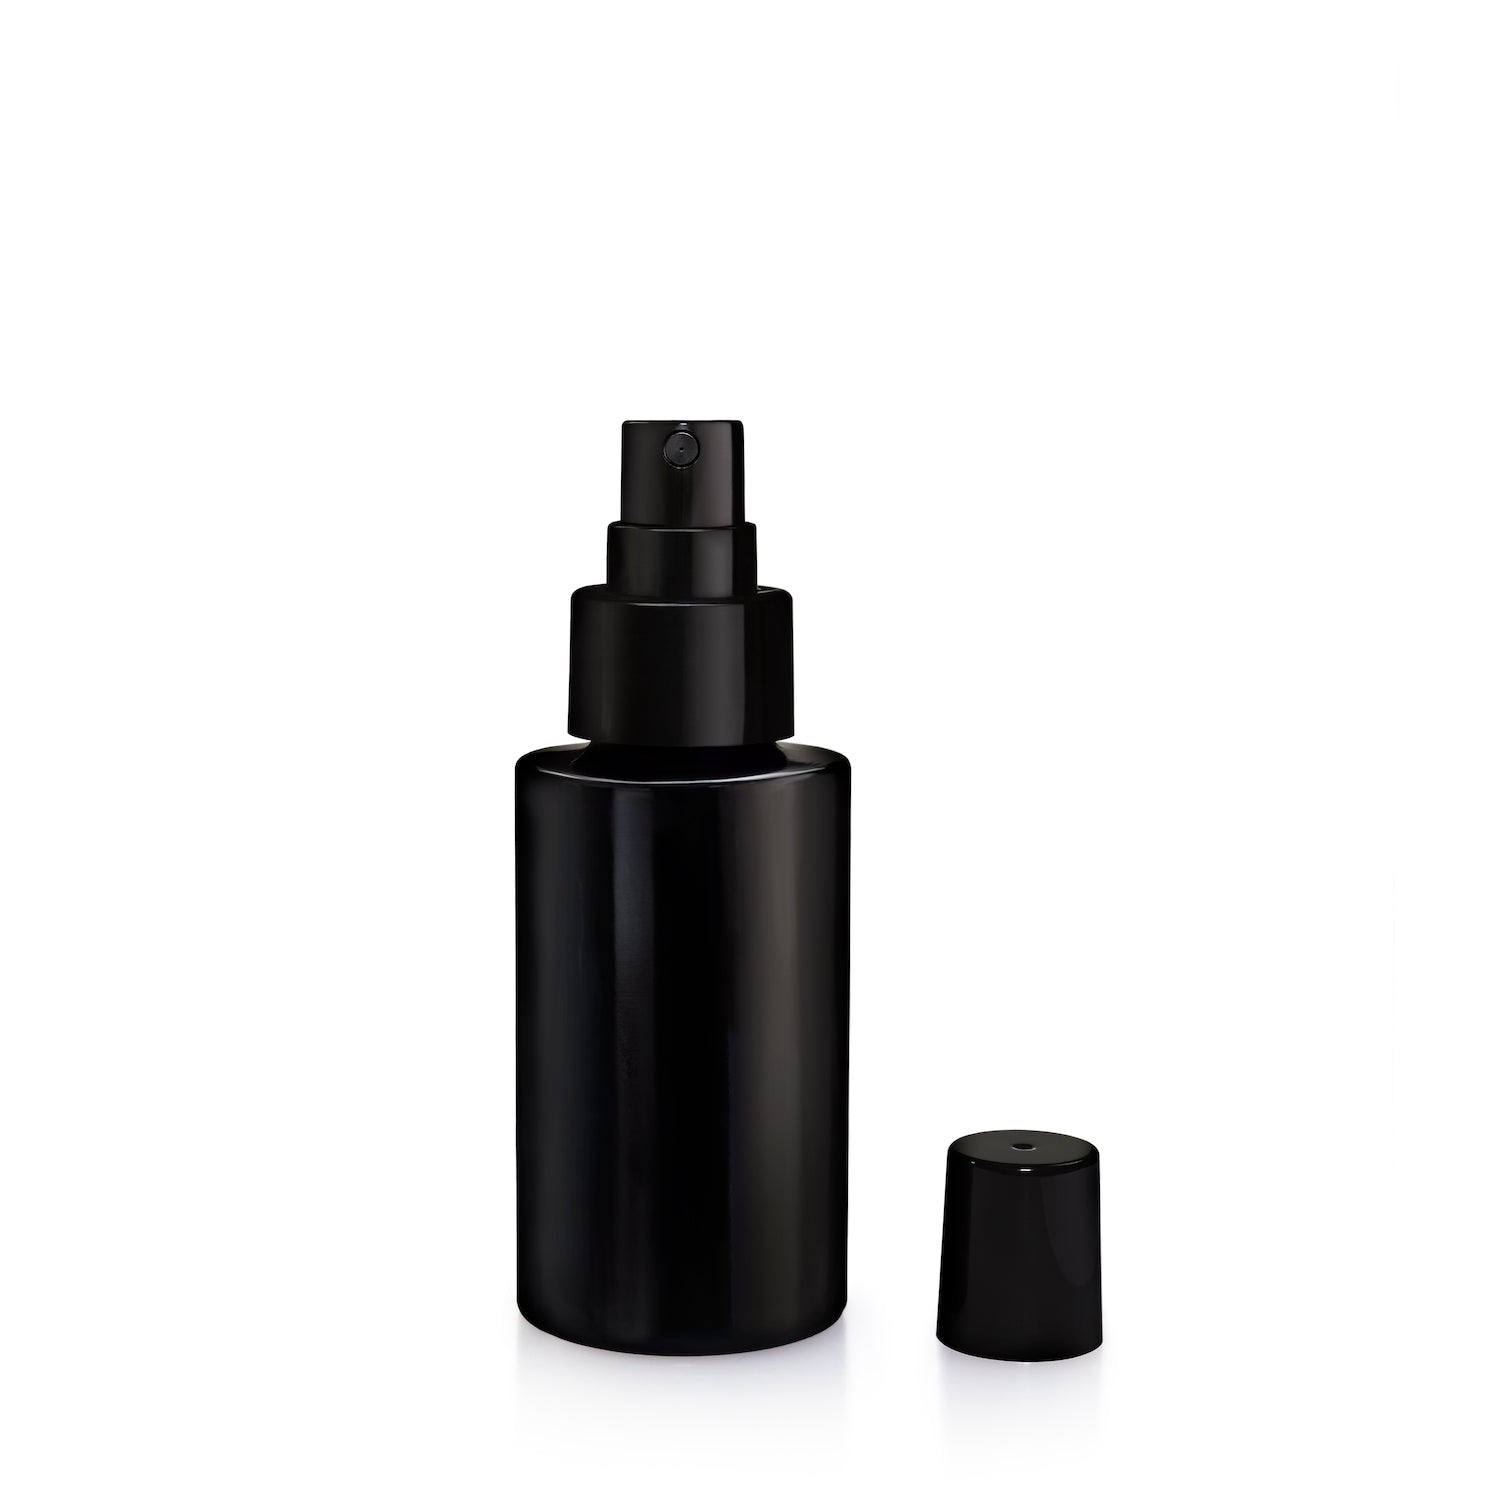 te plus te-Hinoki Noir Red Essential Pure Oil, this unique formula highlights the harmony between Tsubaki oil and Hinoki essential oil to unlock the coveted beauty elixir used in Japan.